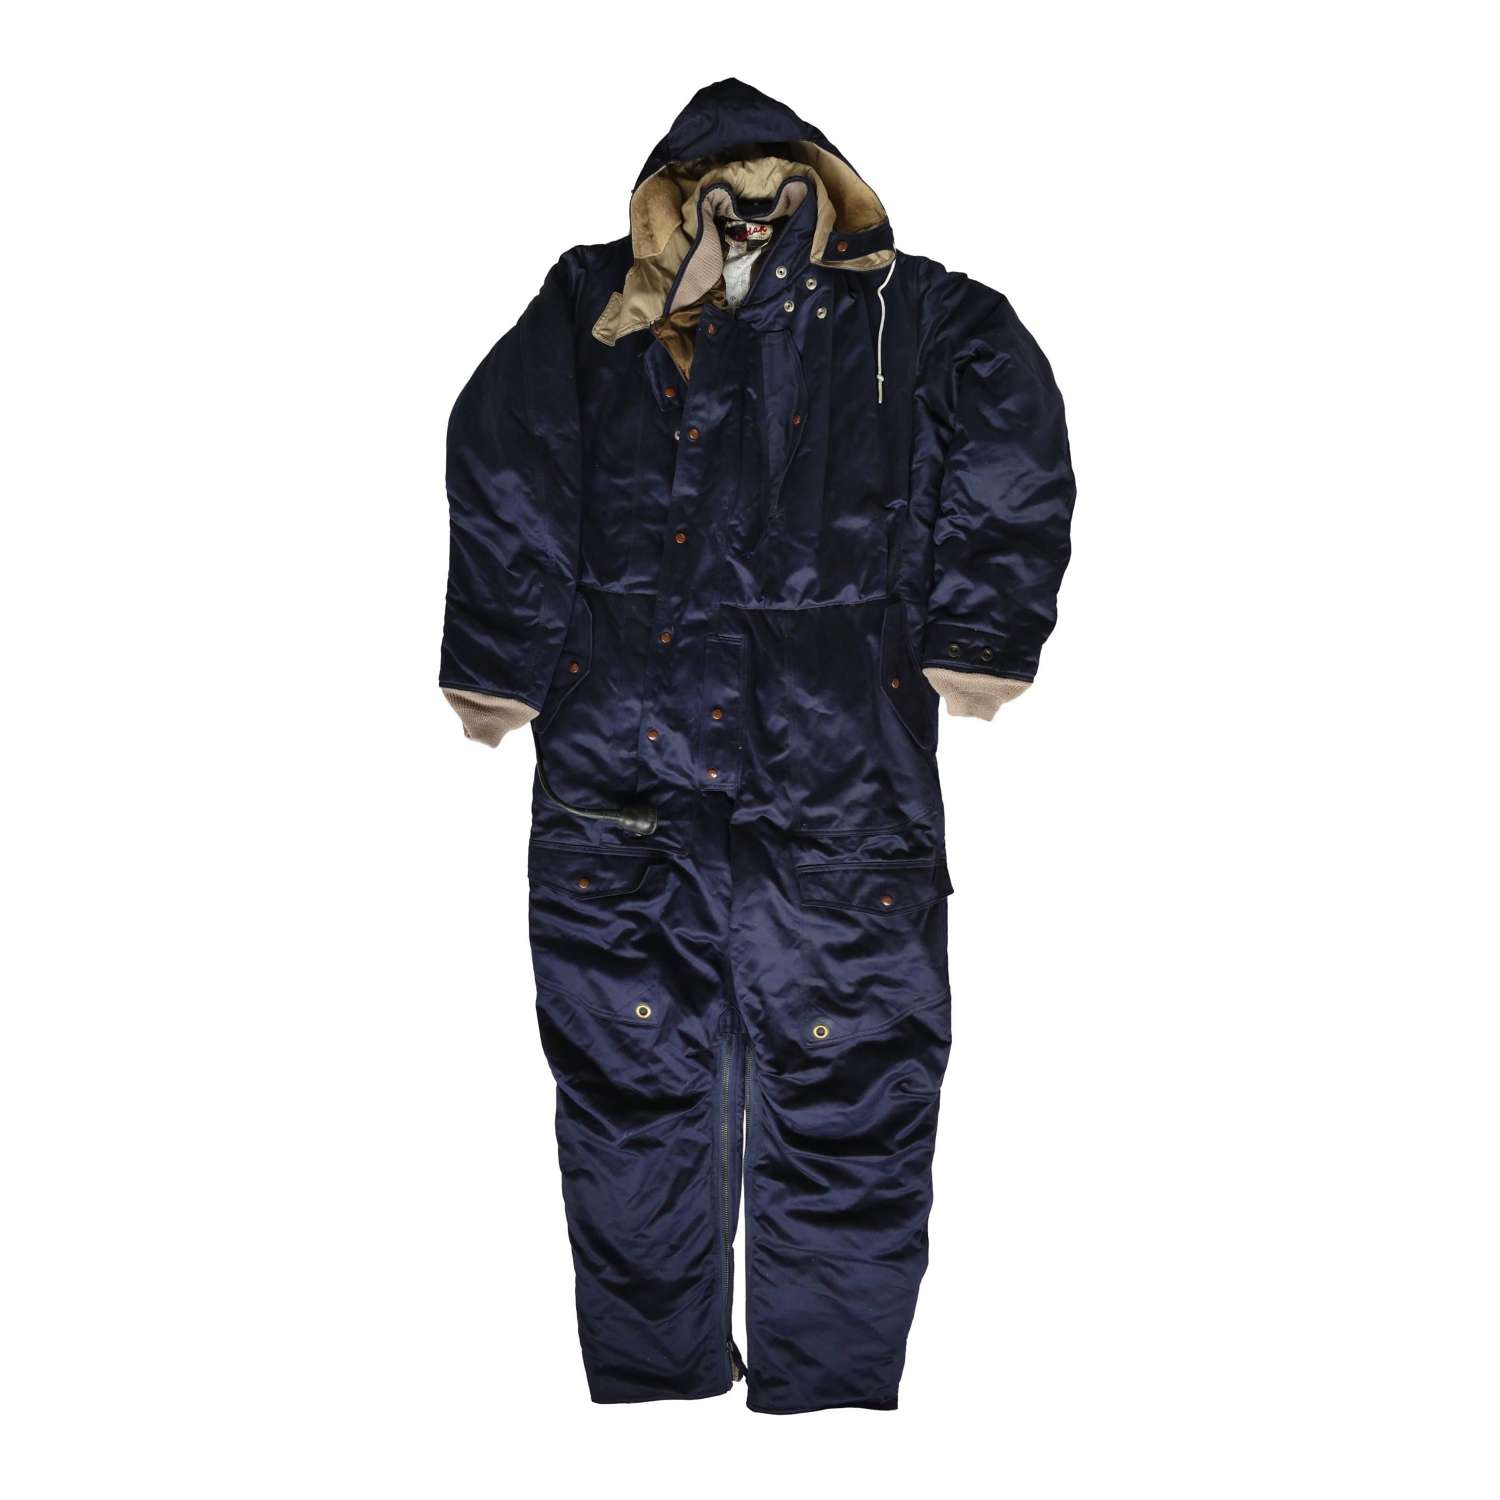 Baxter, Taylor & Woodhouse electrically heated suit